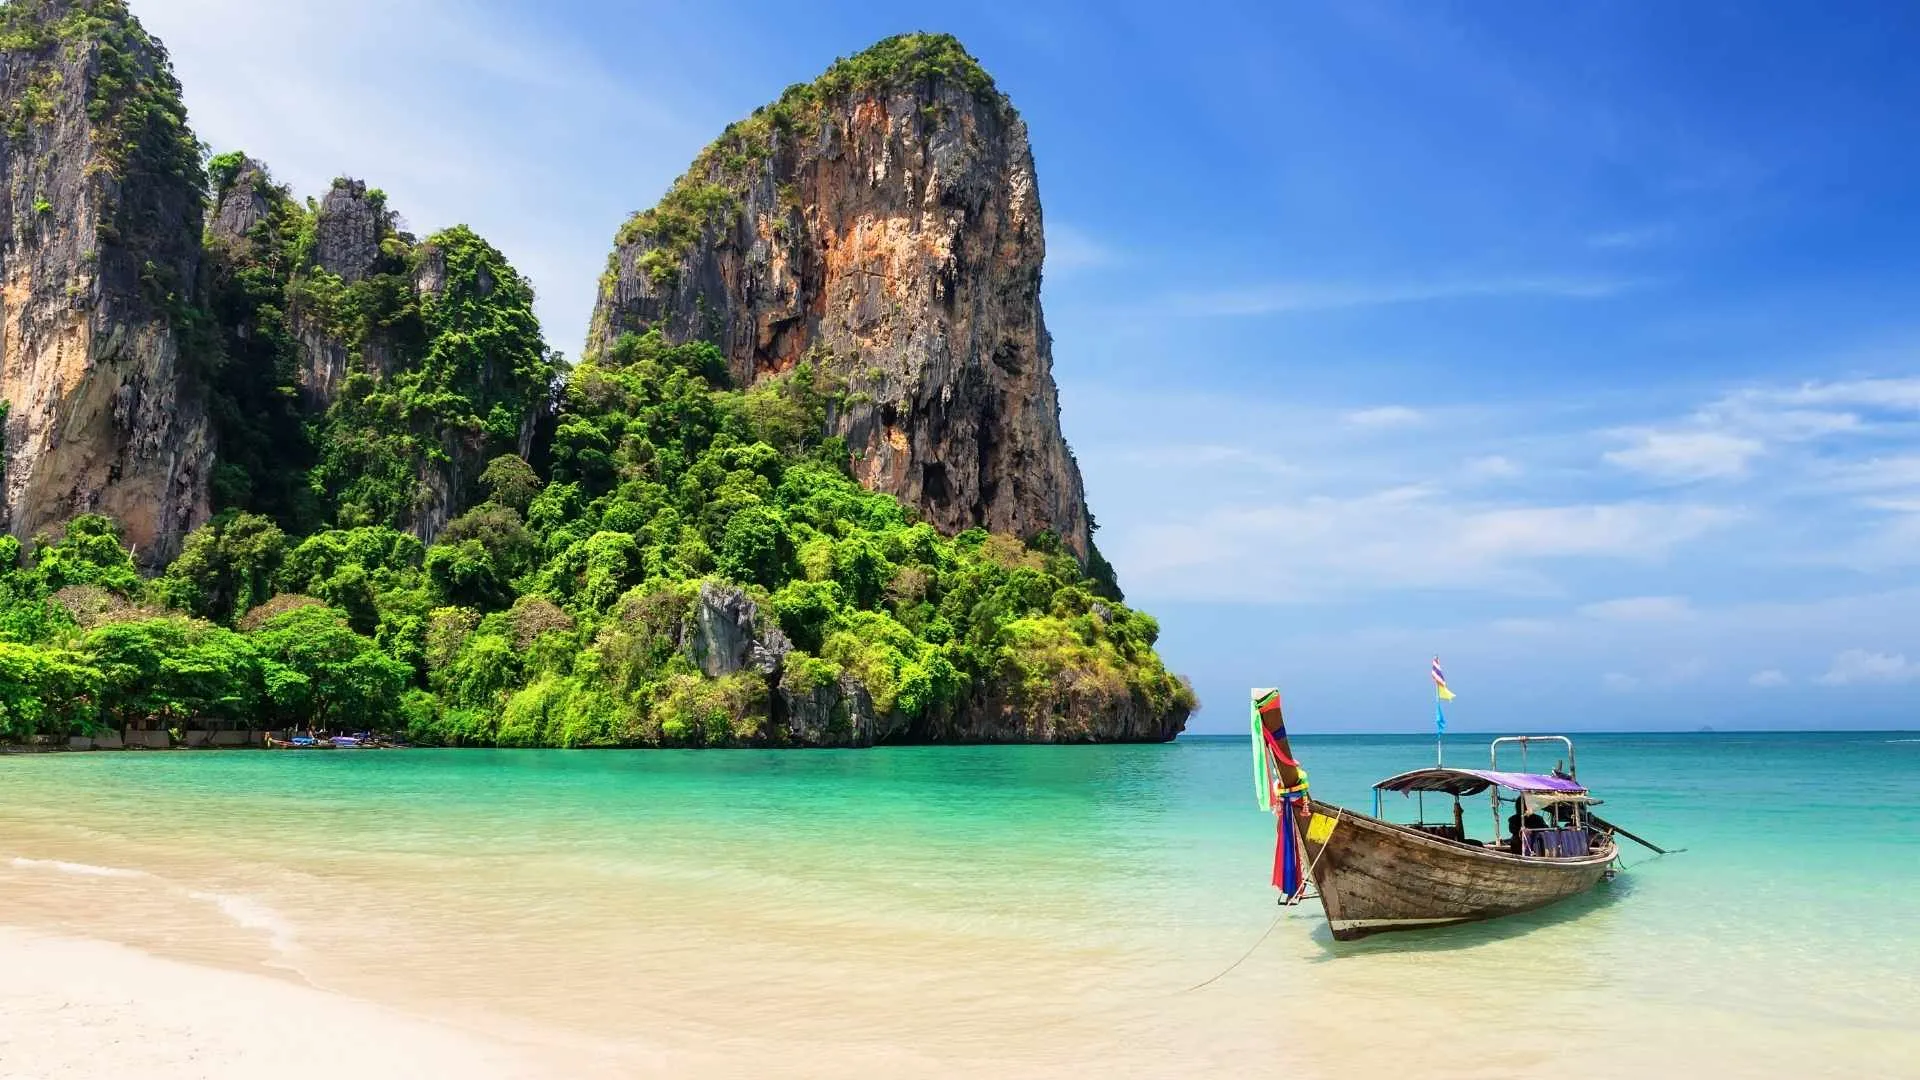 Phuket, Thailand - most scenic islands in the world